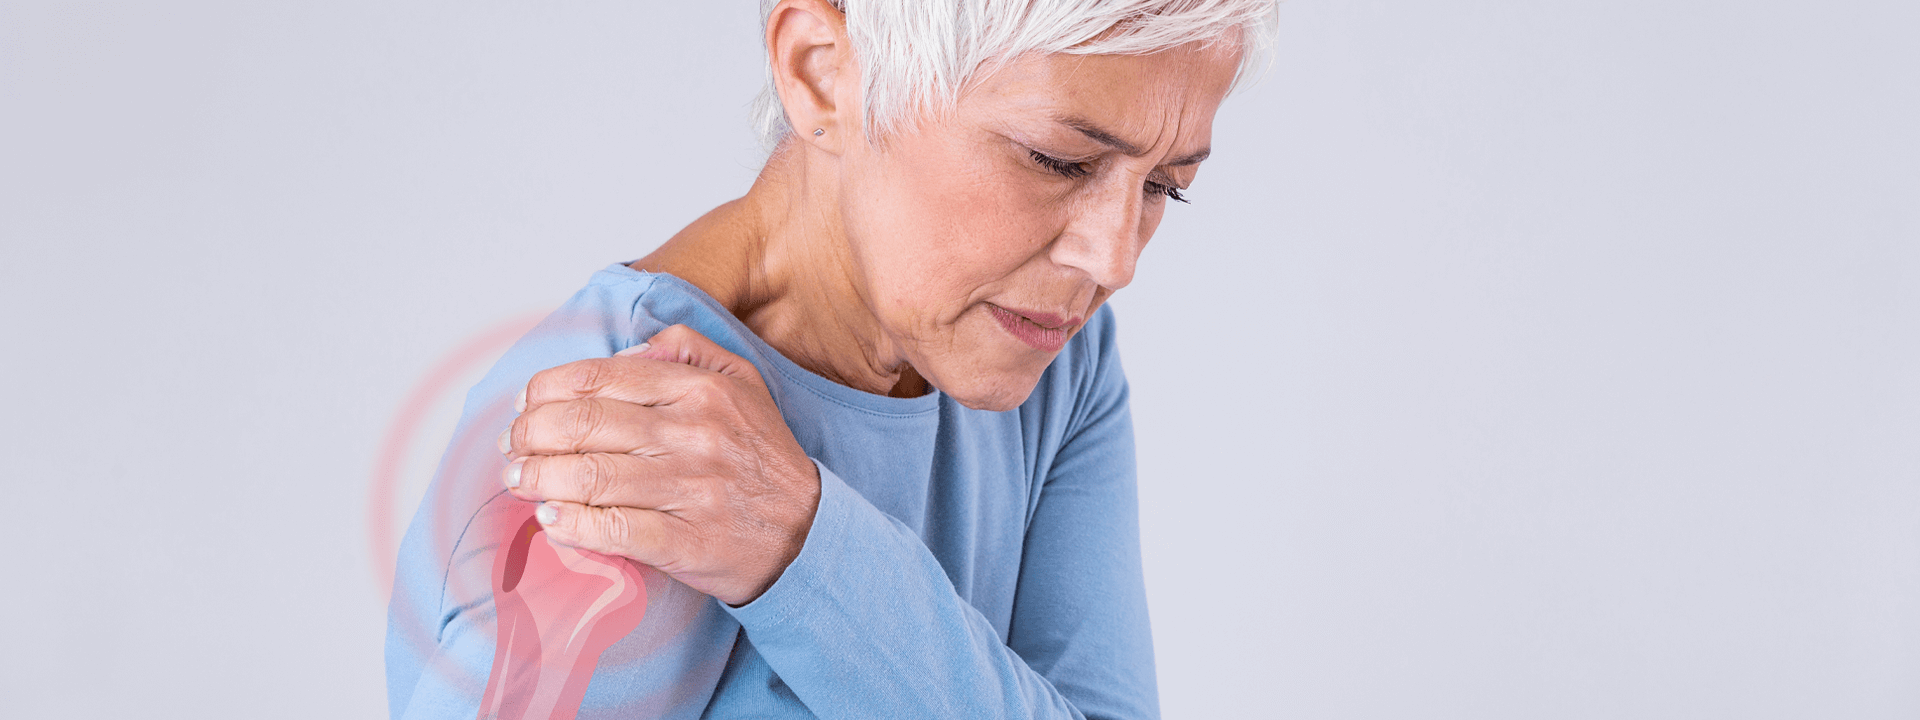 How to Avoid Joint and Muscle Inflammation